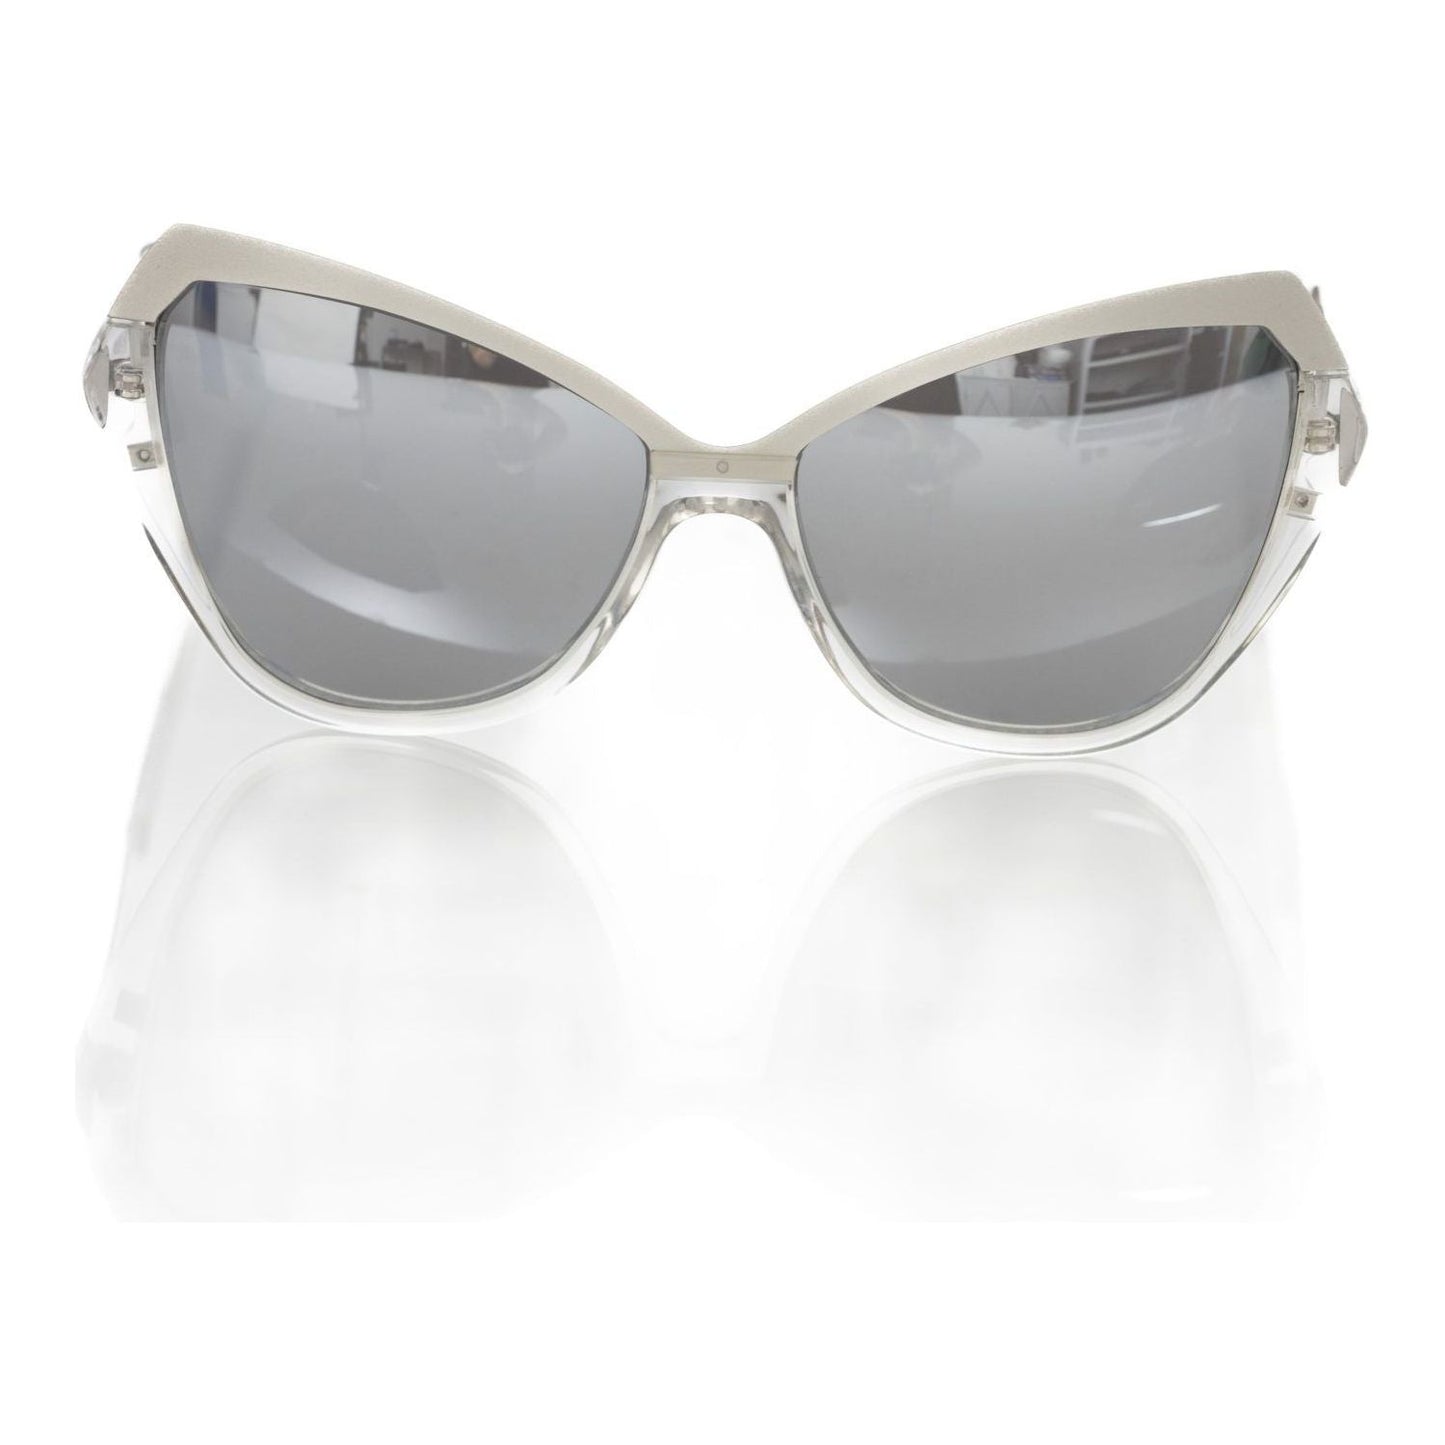 Chic Cat Eye Shades with Metallic Accents Frankie Morello